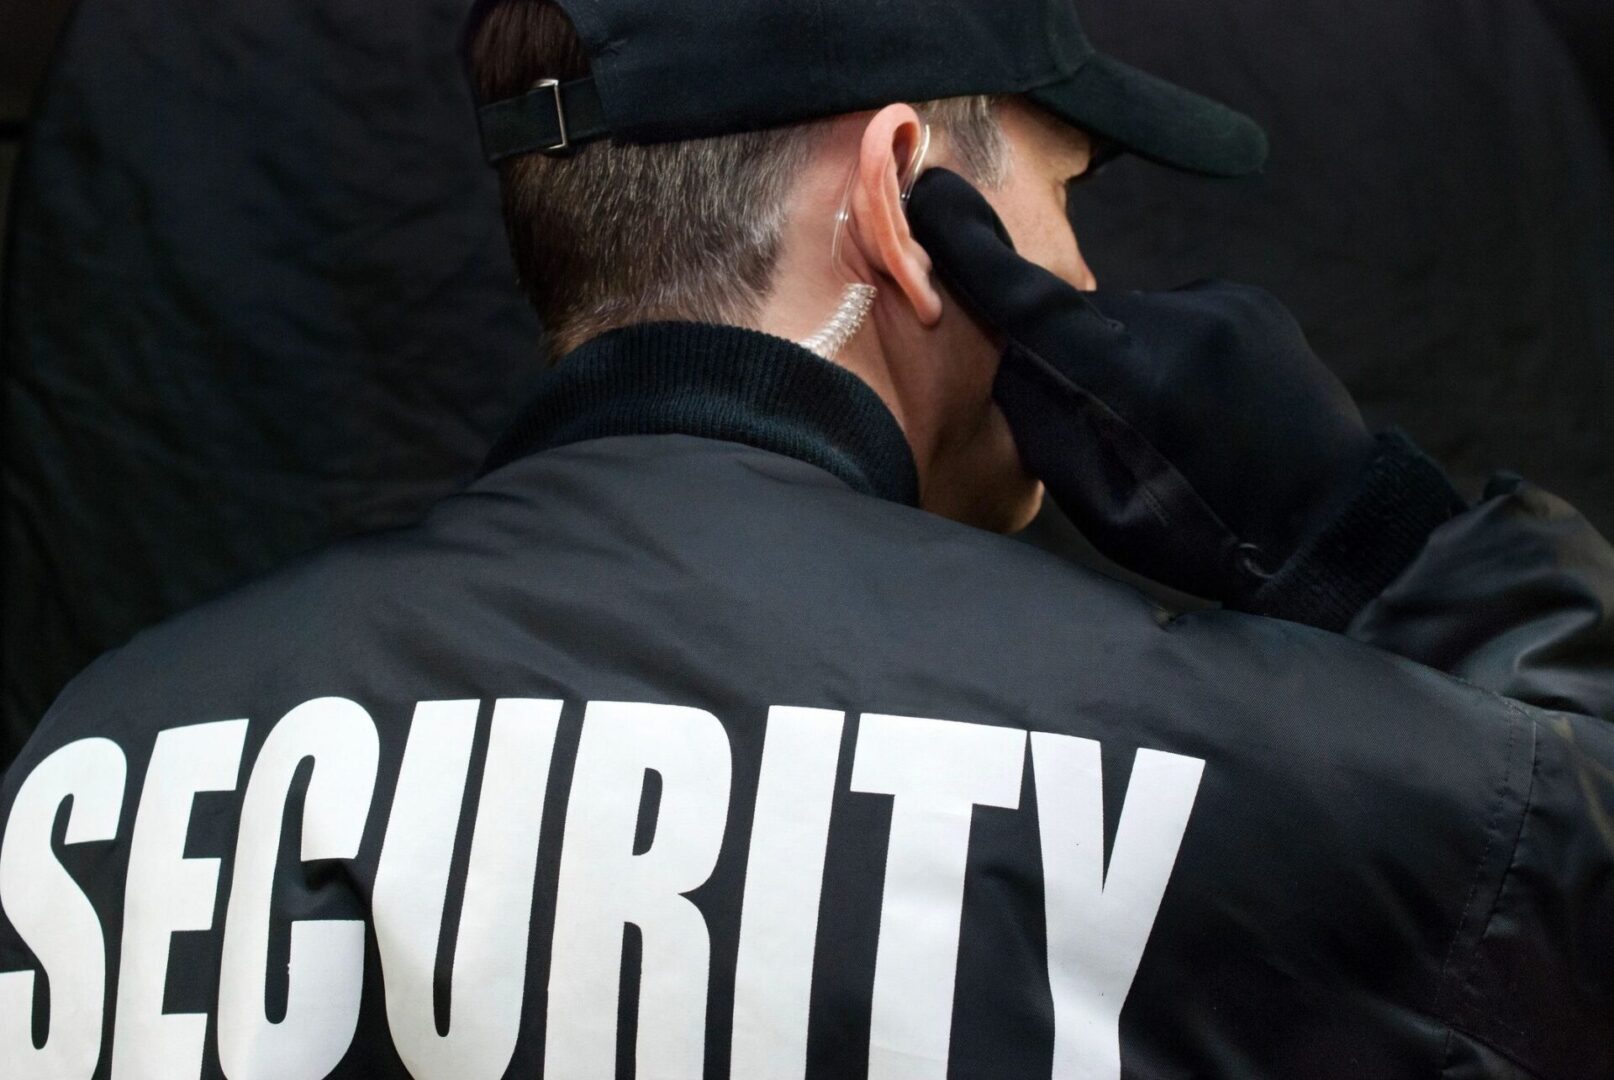 A security guard adjusts his ear plugs.